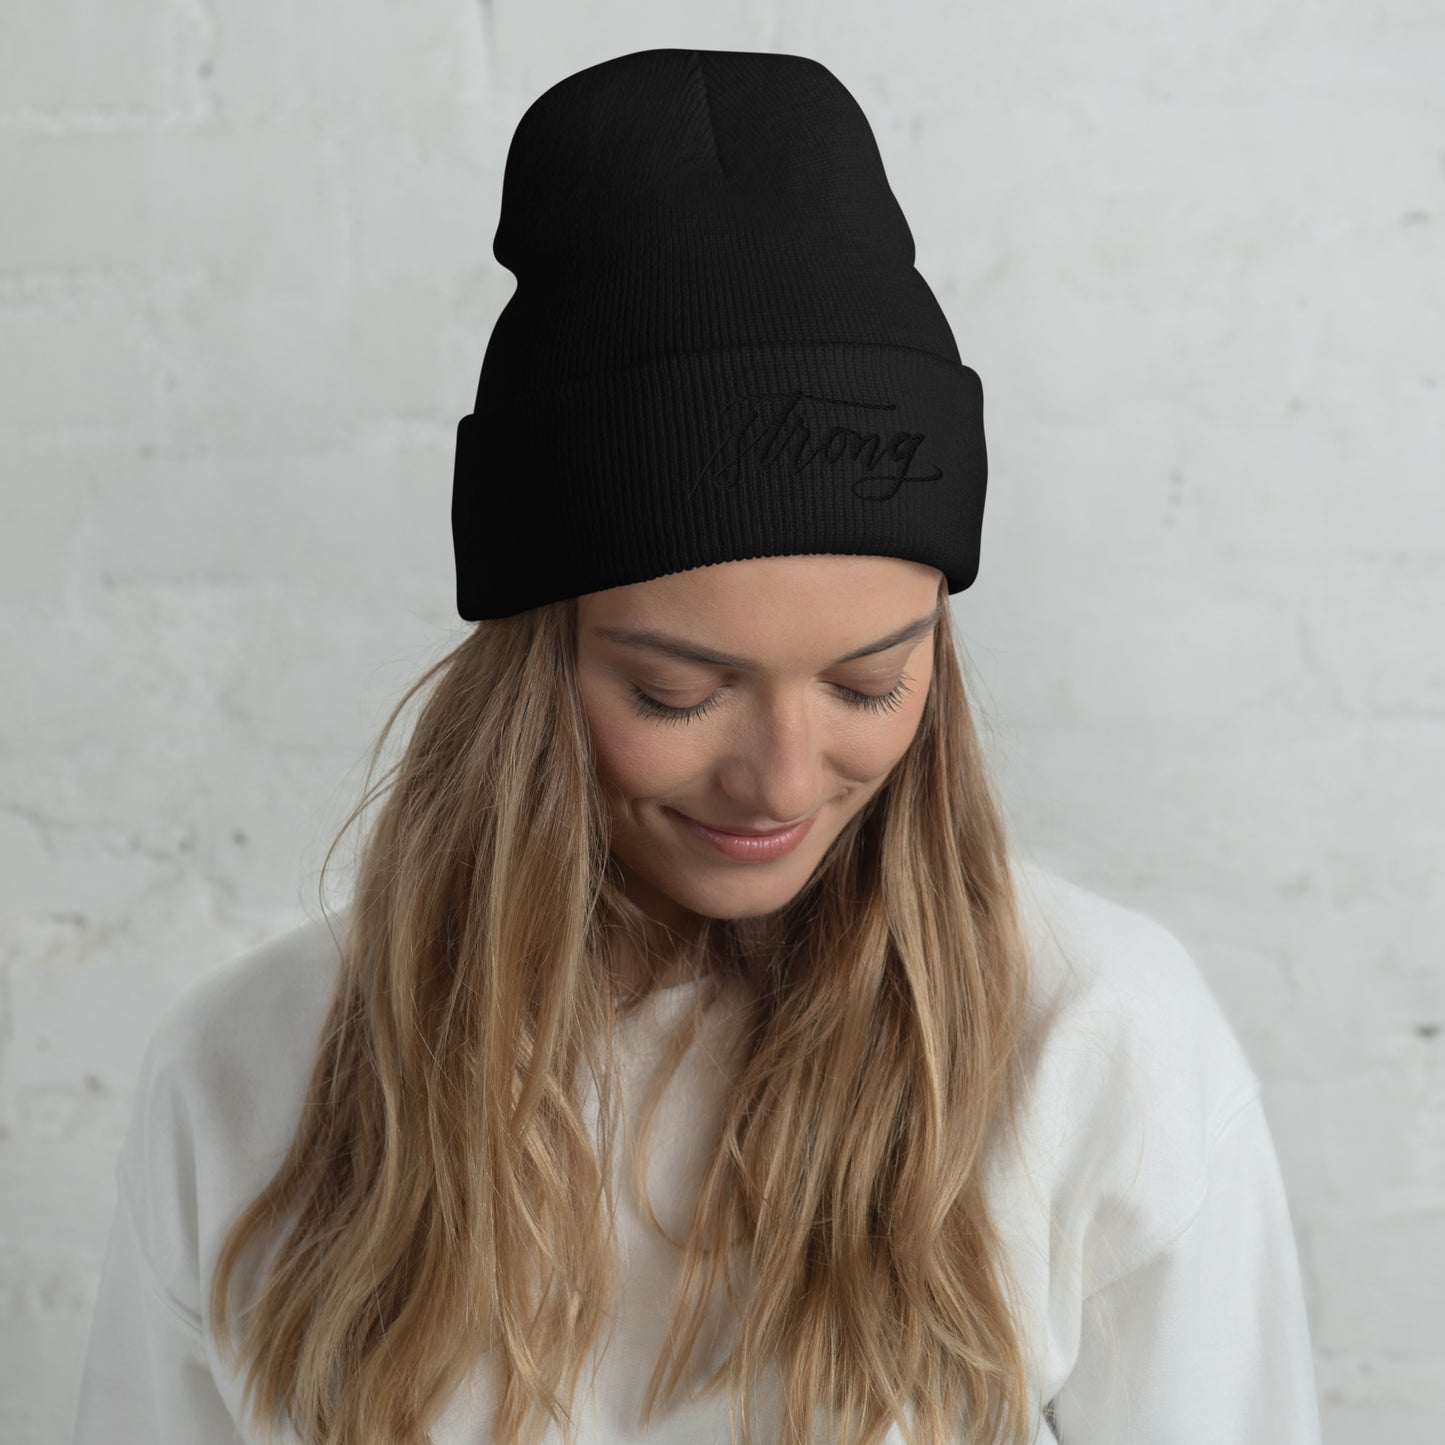 Embroidered Black Script "Strong" Calligraphy on Black or Grey Cuffed Beanie